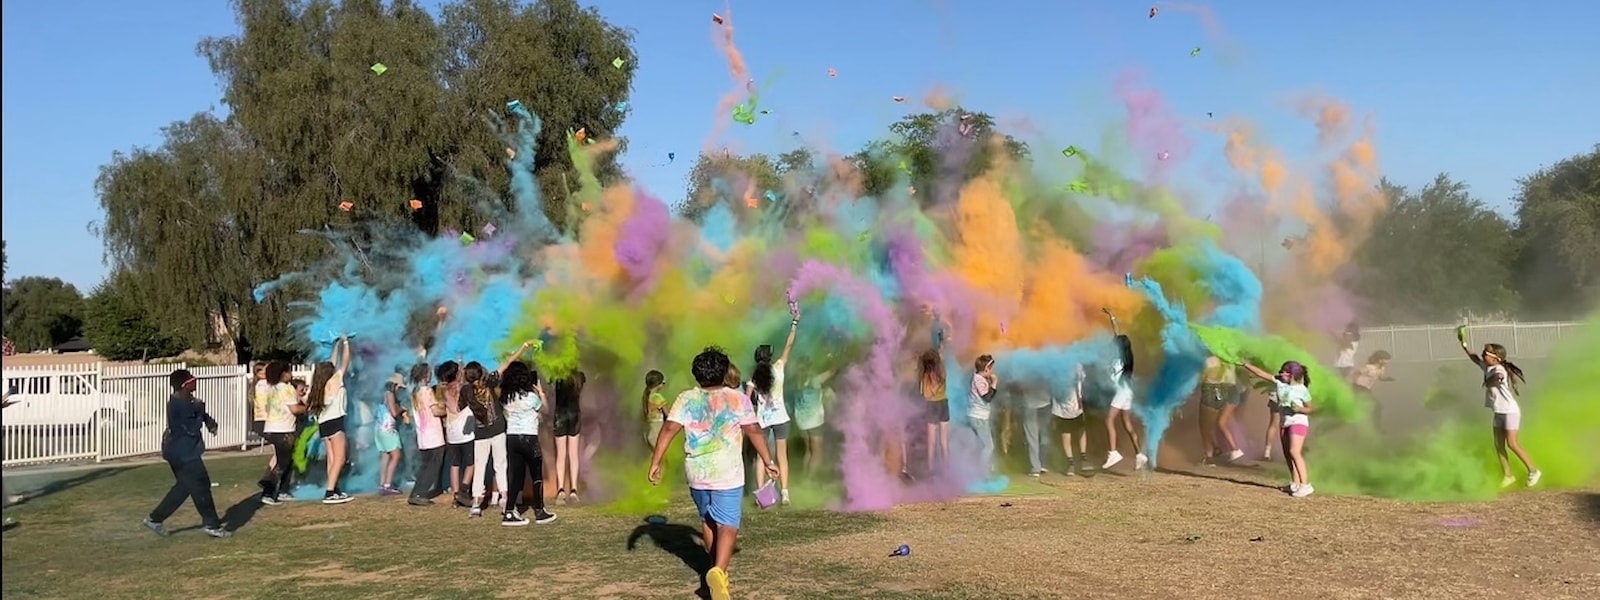 kids throwing colored chalk in the air